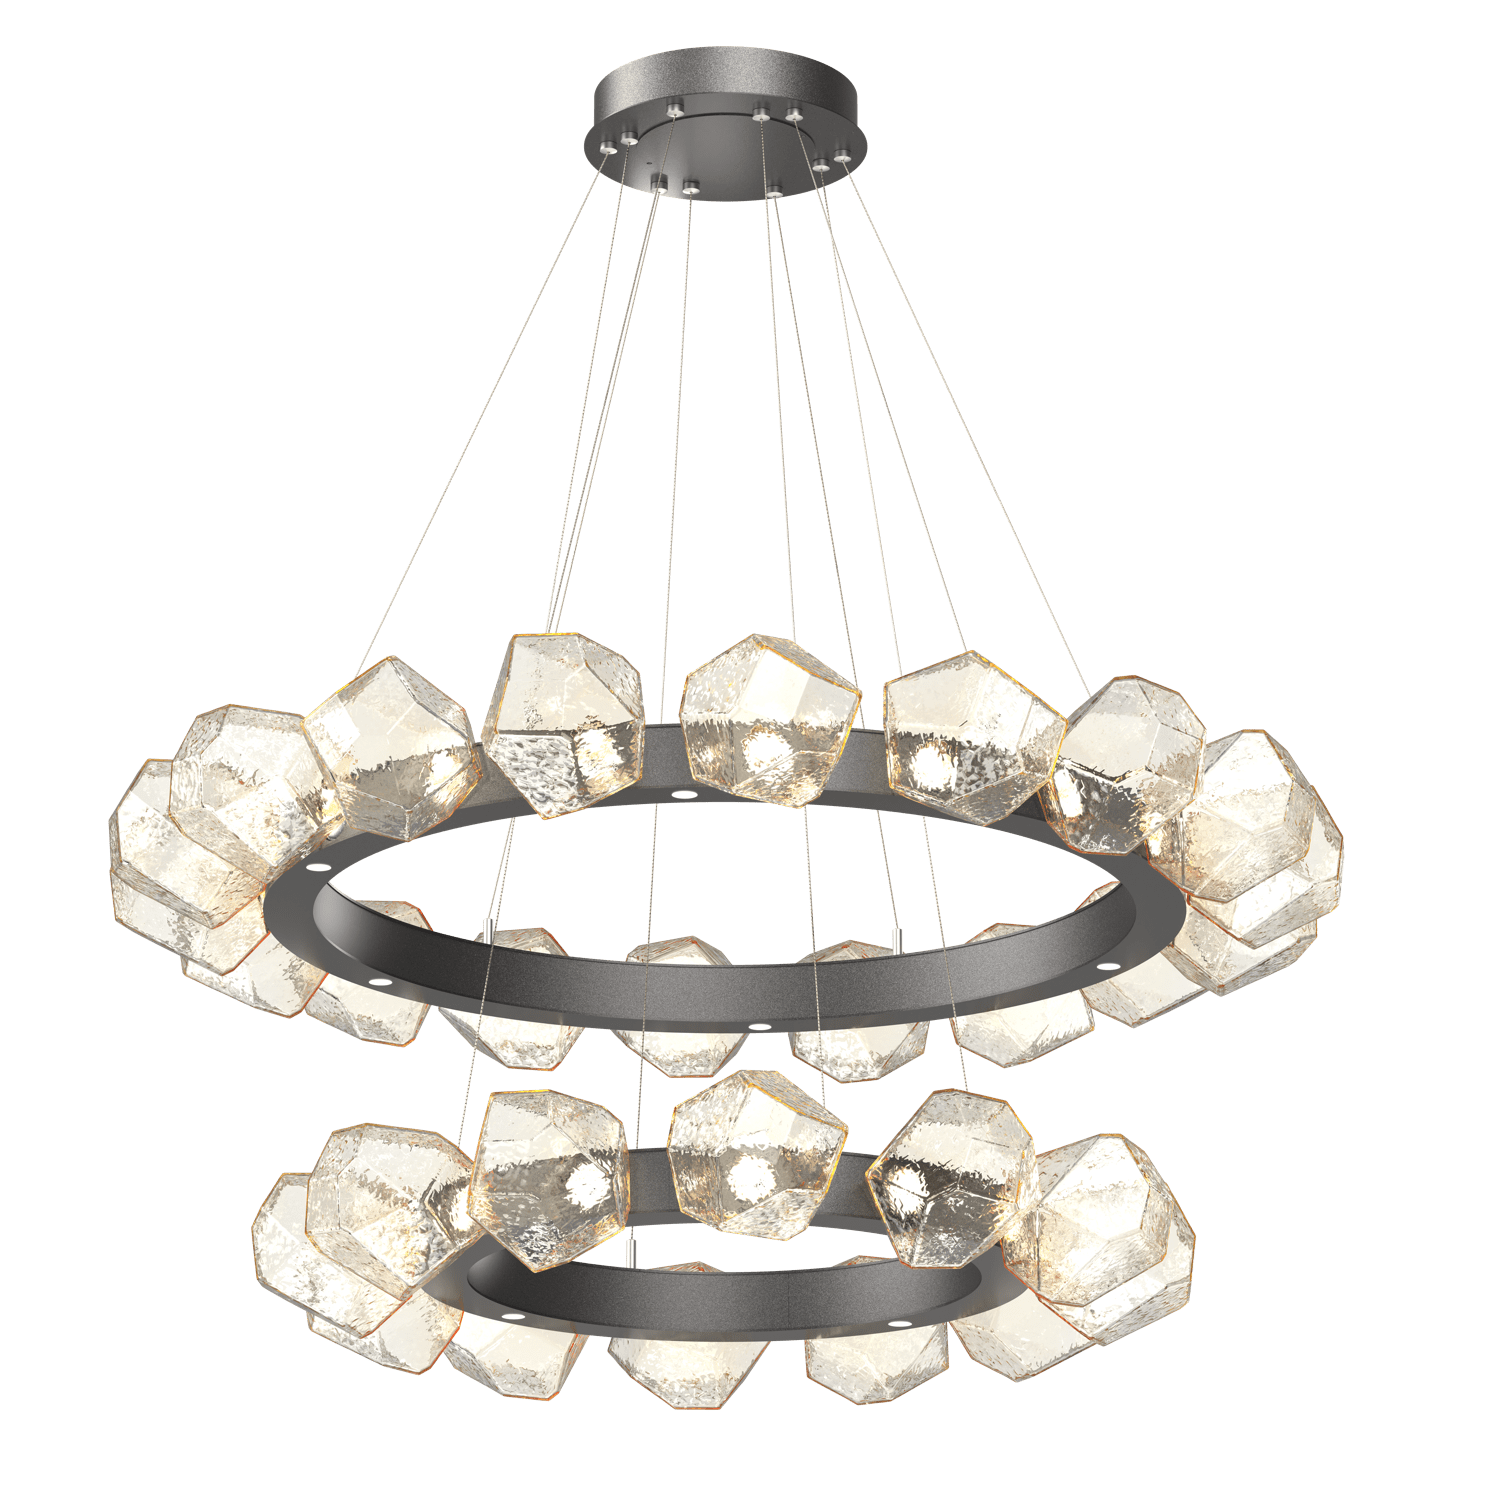 CHB0039-2T-GP-A-Hammerton-Studio-Gem-48-inch-two-tier-radial-ring-chandelier-with-graphite-finish-and-amber-blown-glass-shades-and-LED-lamping